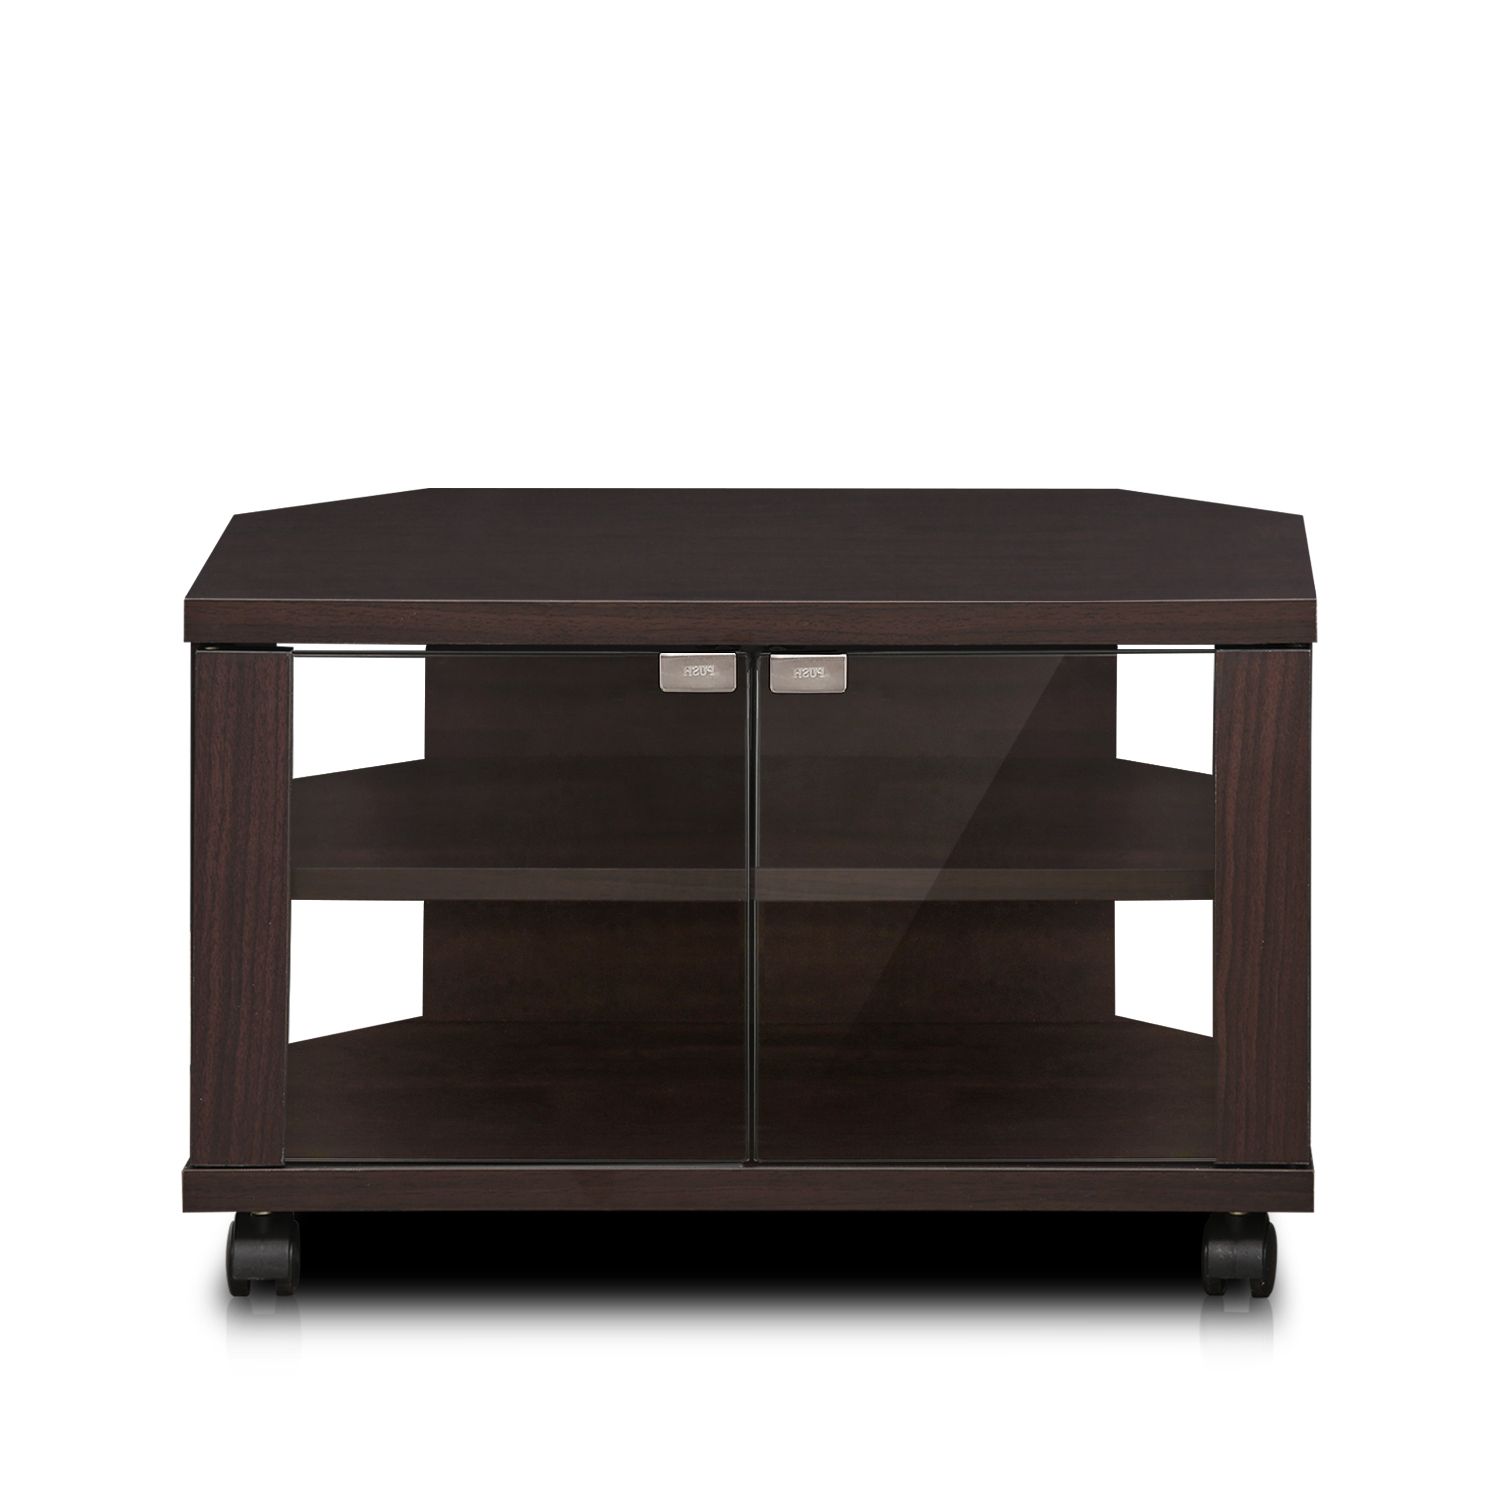 Furinno Indo Petite Tv Stand With Double Glass Doors And Within Jakarta Tv Stands (View 2 of 20)